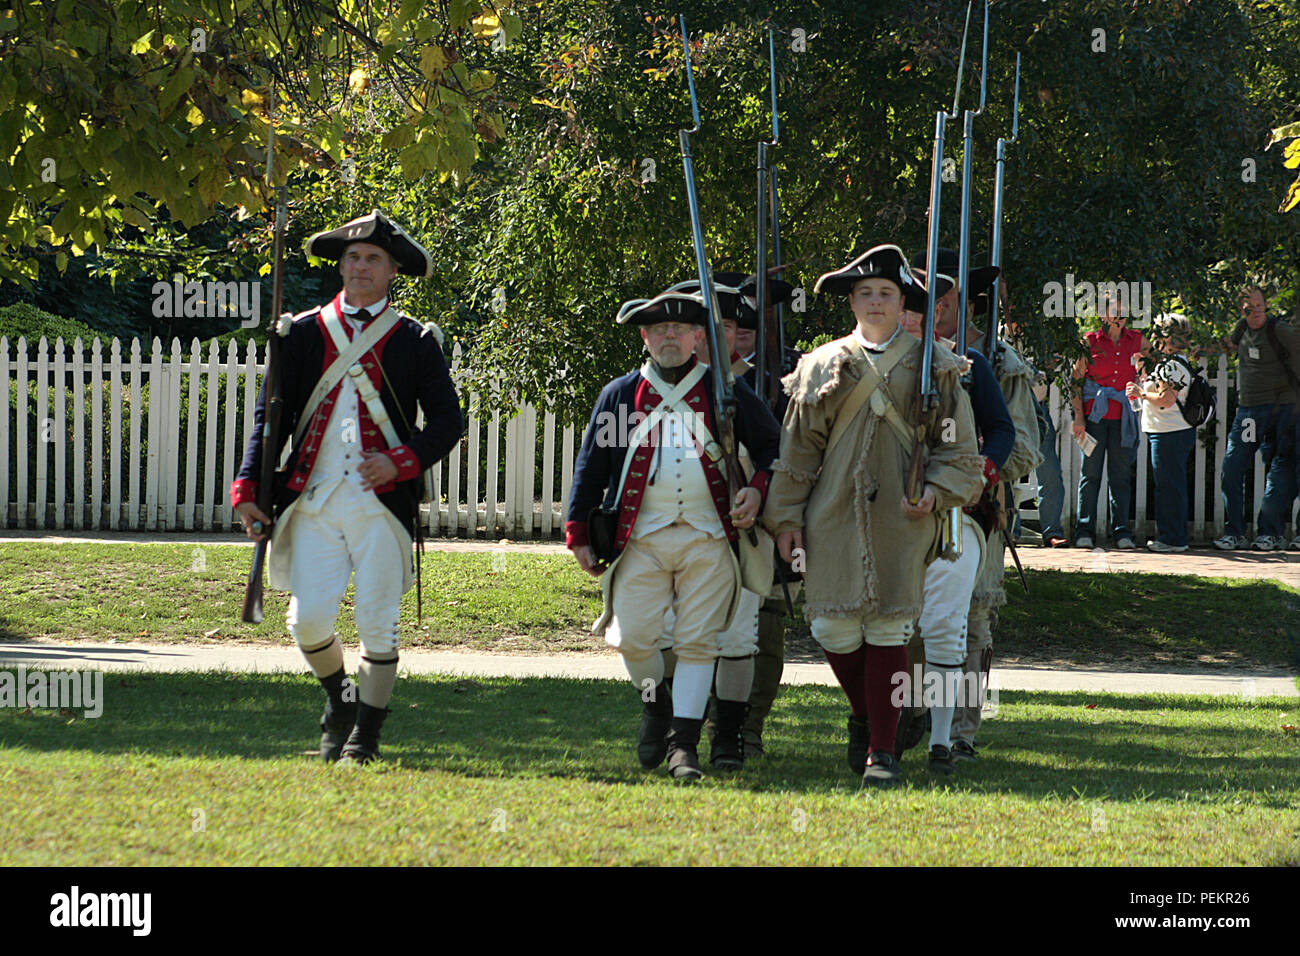 Continental army during the American Revolution. Historical reenactment at Colonial Williamsburg, Virginia, USA. Stock Photo